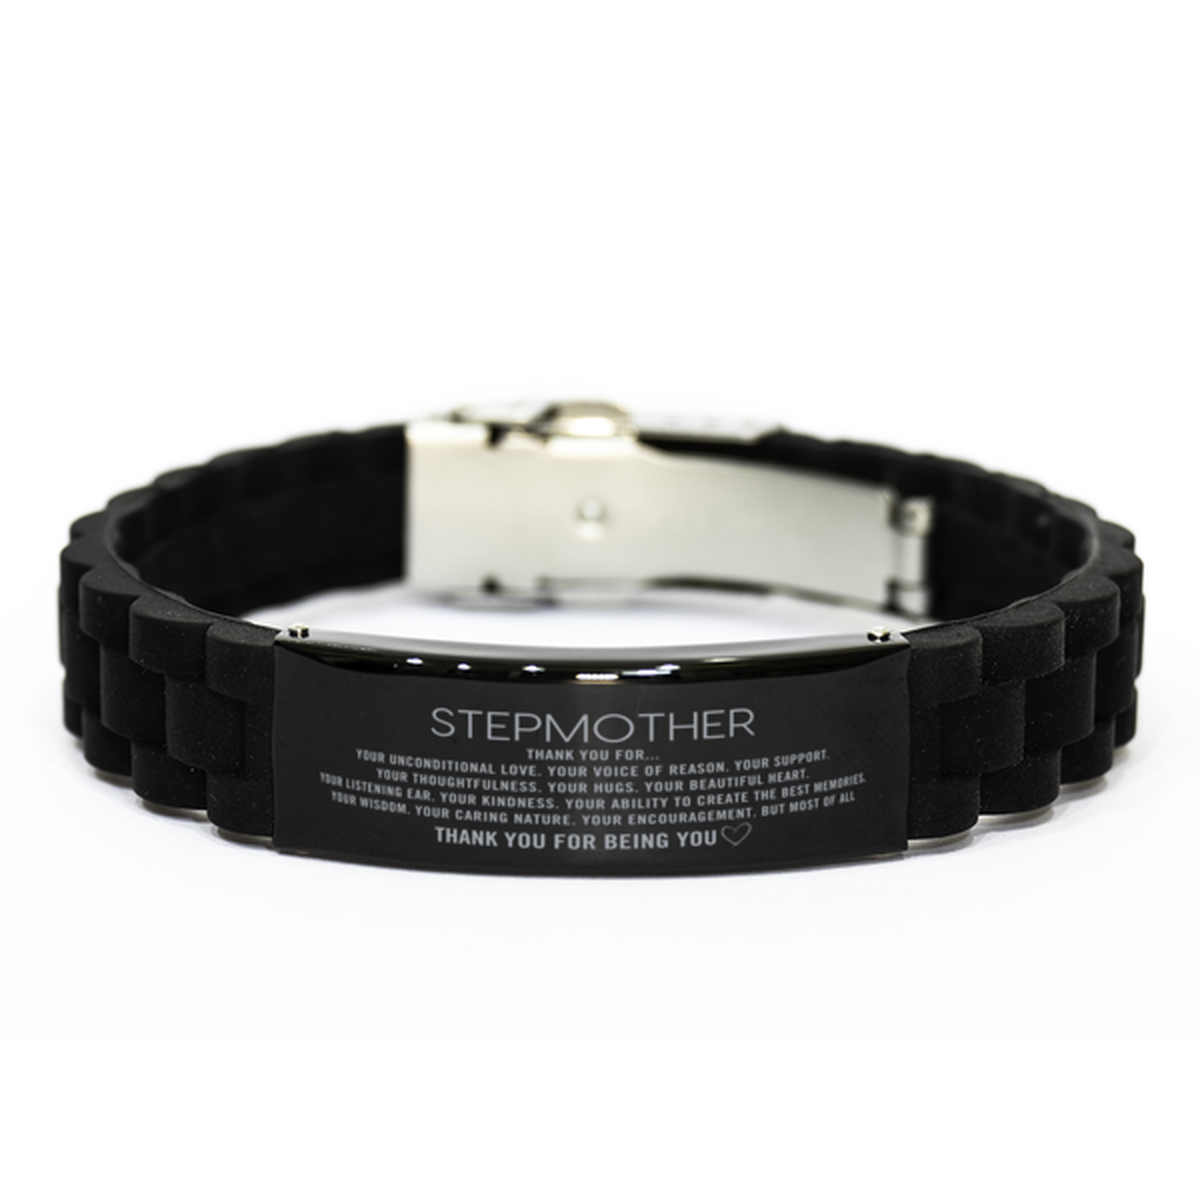 Stepmother Black Glidelock Clasp Bracelet Custom, Engraved Gifts For Stepmother Christmas Graduation Birthday Gifts for Men Women Stepmother Thank you for Your unconditional love